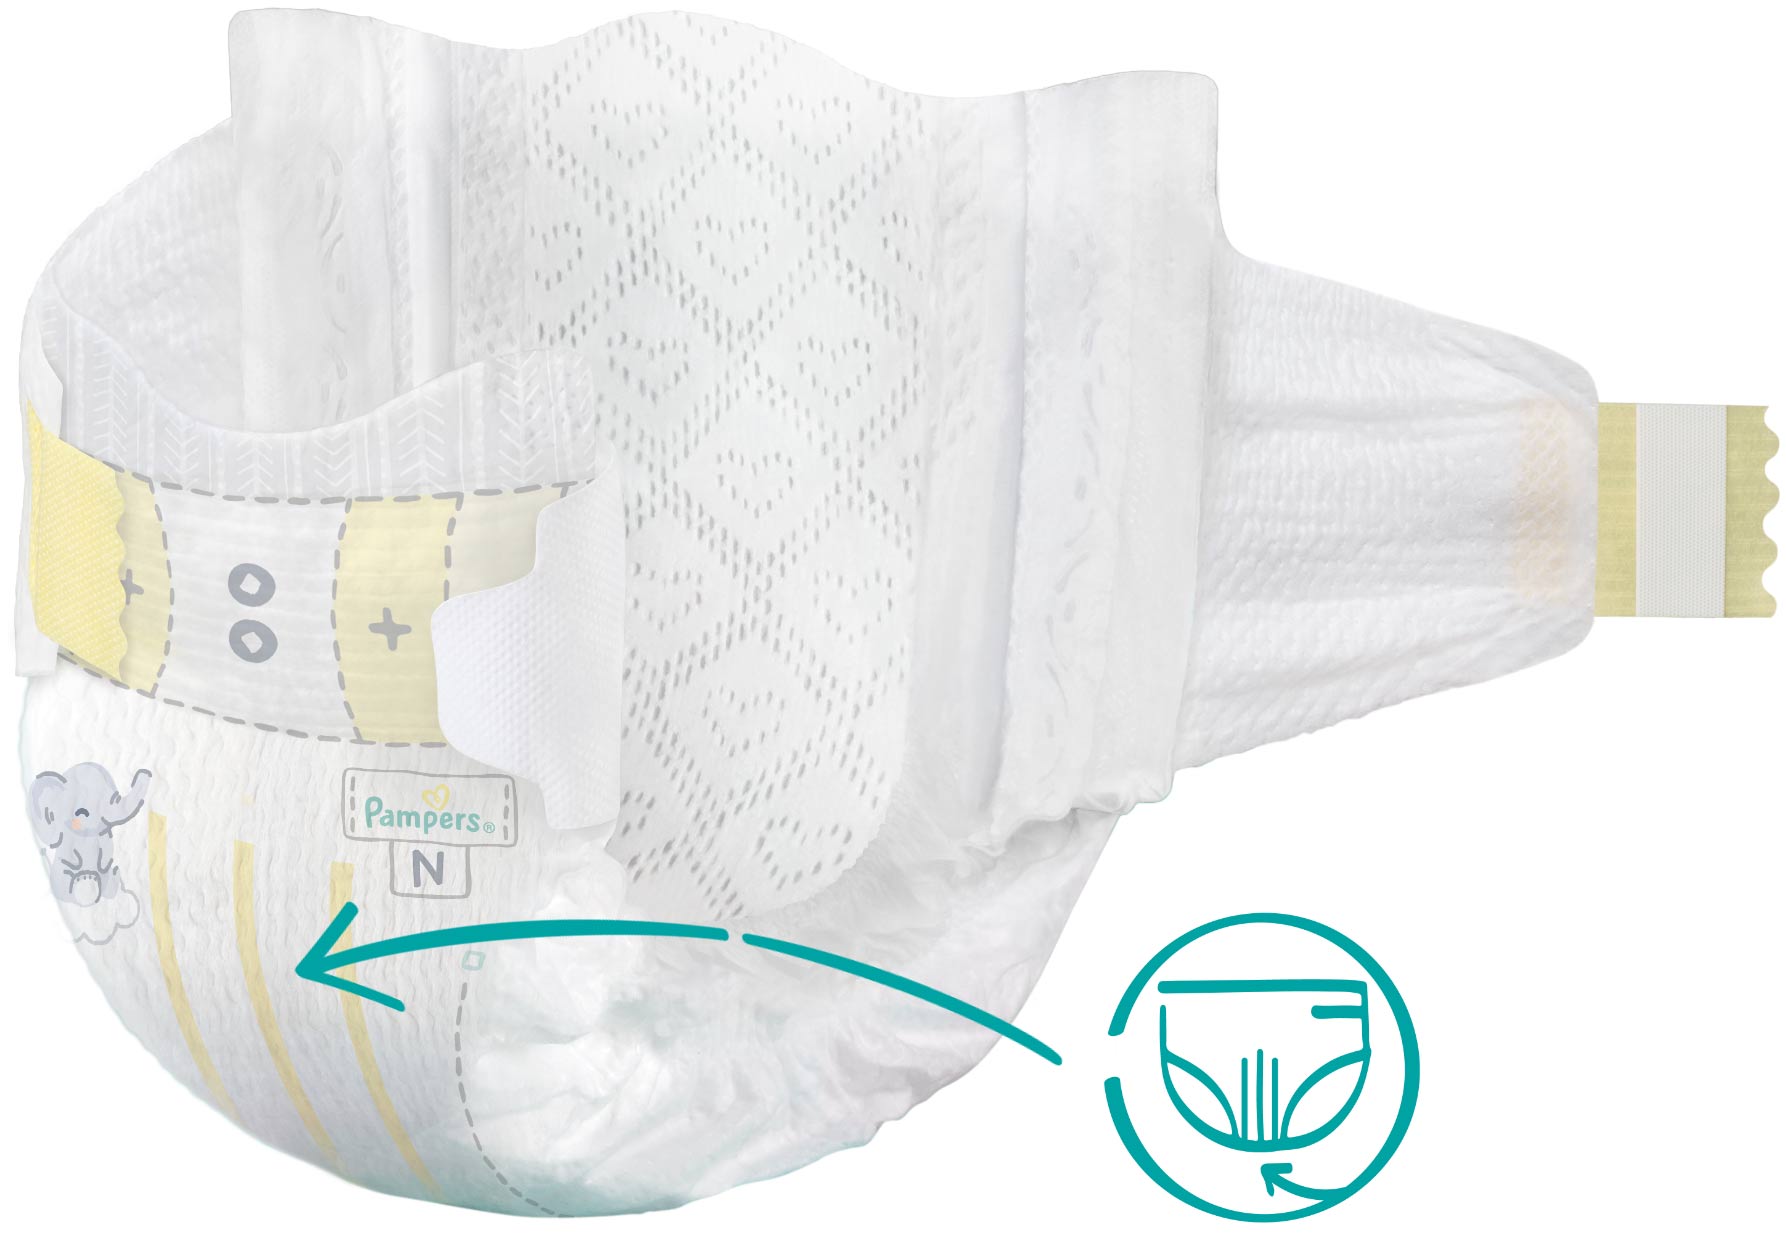 Featuring the New Pampers Multi-stripe Wetness Indicator™